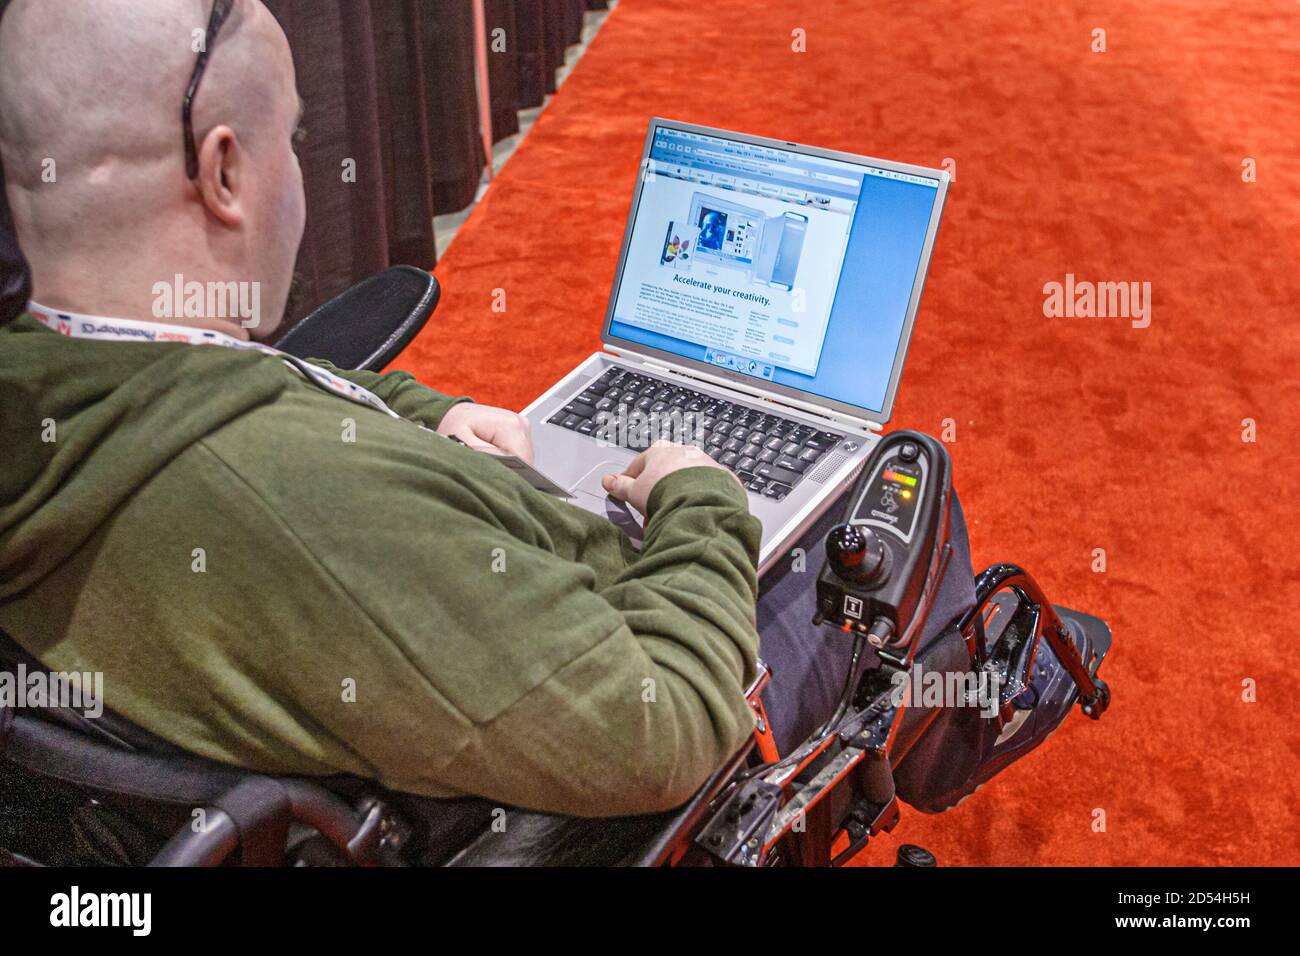 Florida,Miami Beach Convention Center,centre,Photoshop World technology disabled handicapped special needs man male using laptop computer wheelchair, Stock Photo